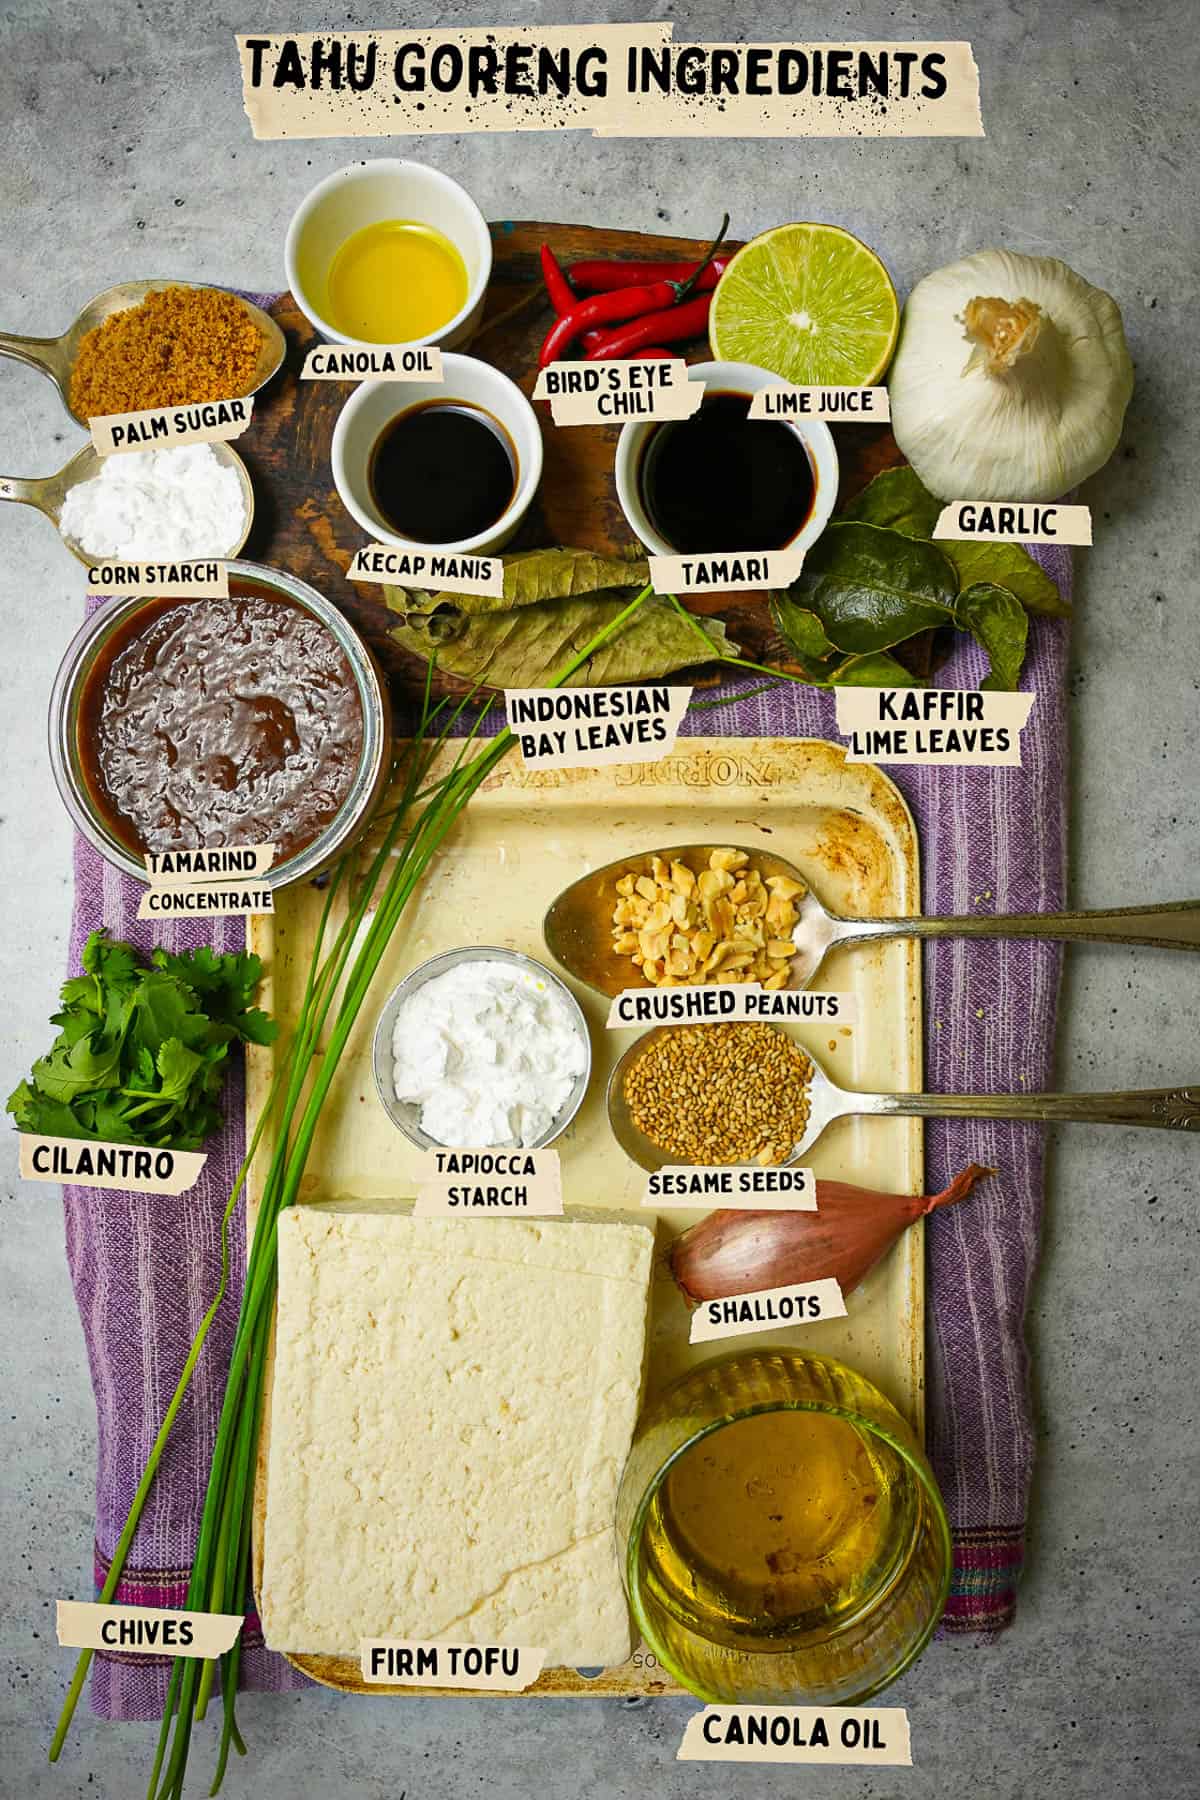 A table of ingredients measured out for tahu goreng.